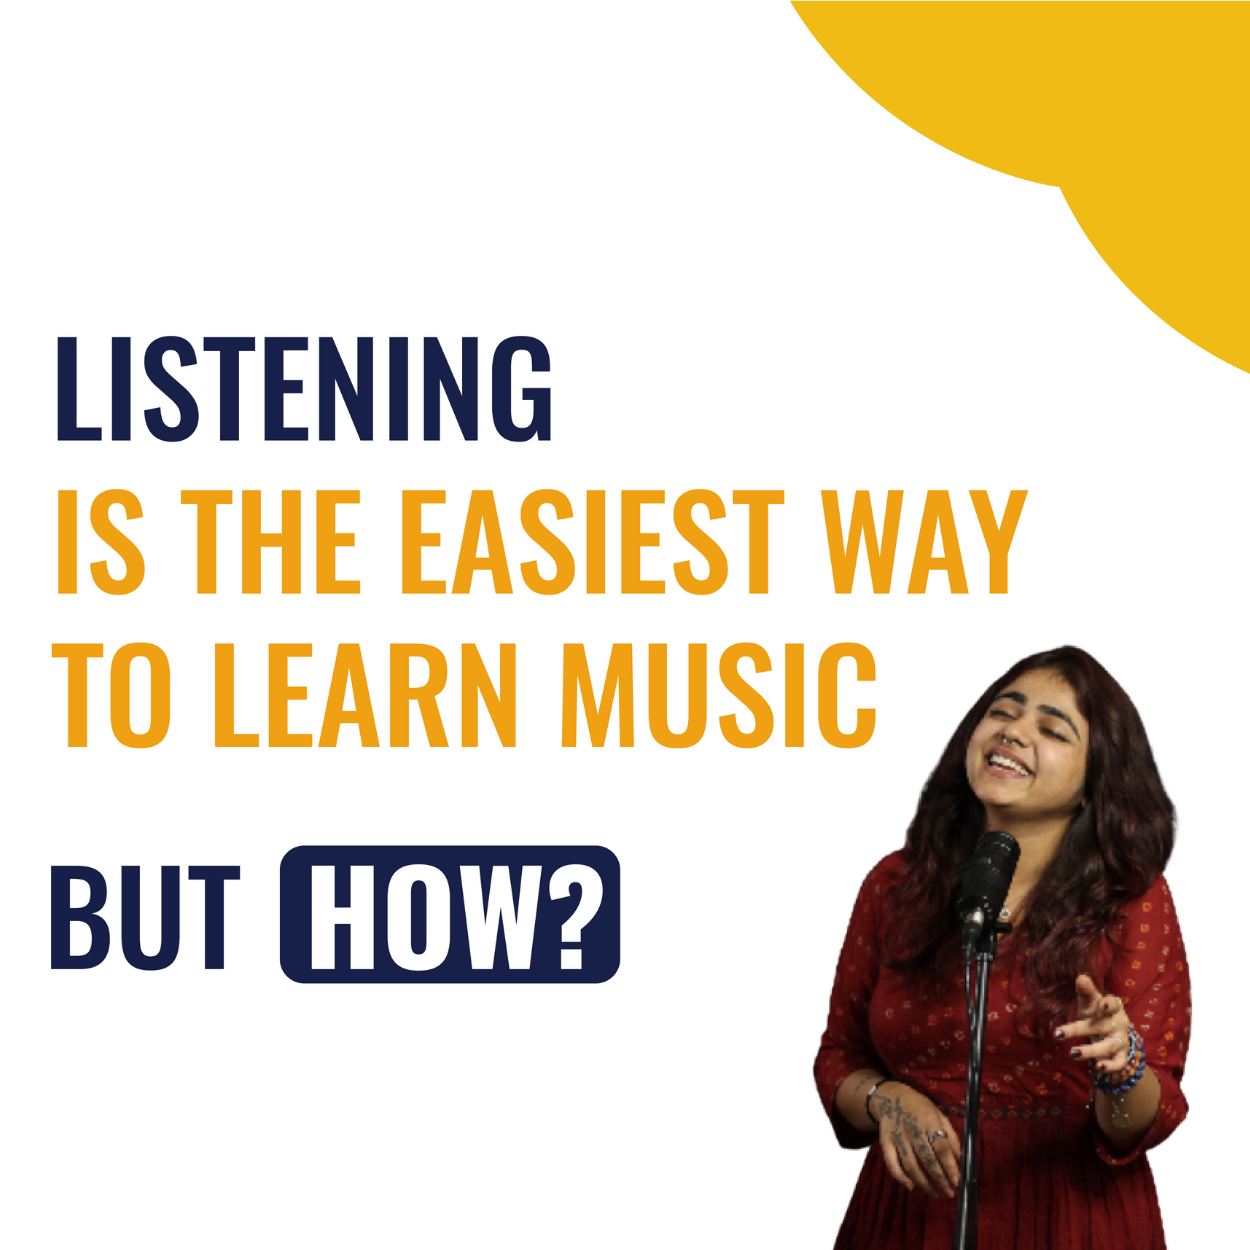 Is Listening the Easiest Way to Learn Music Online or Offline?